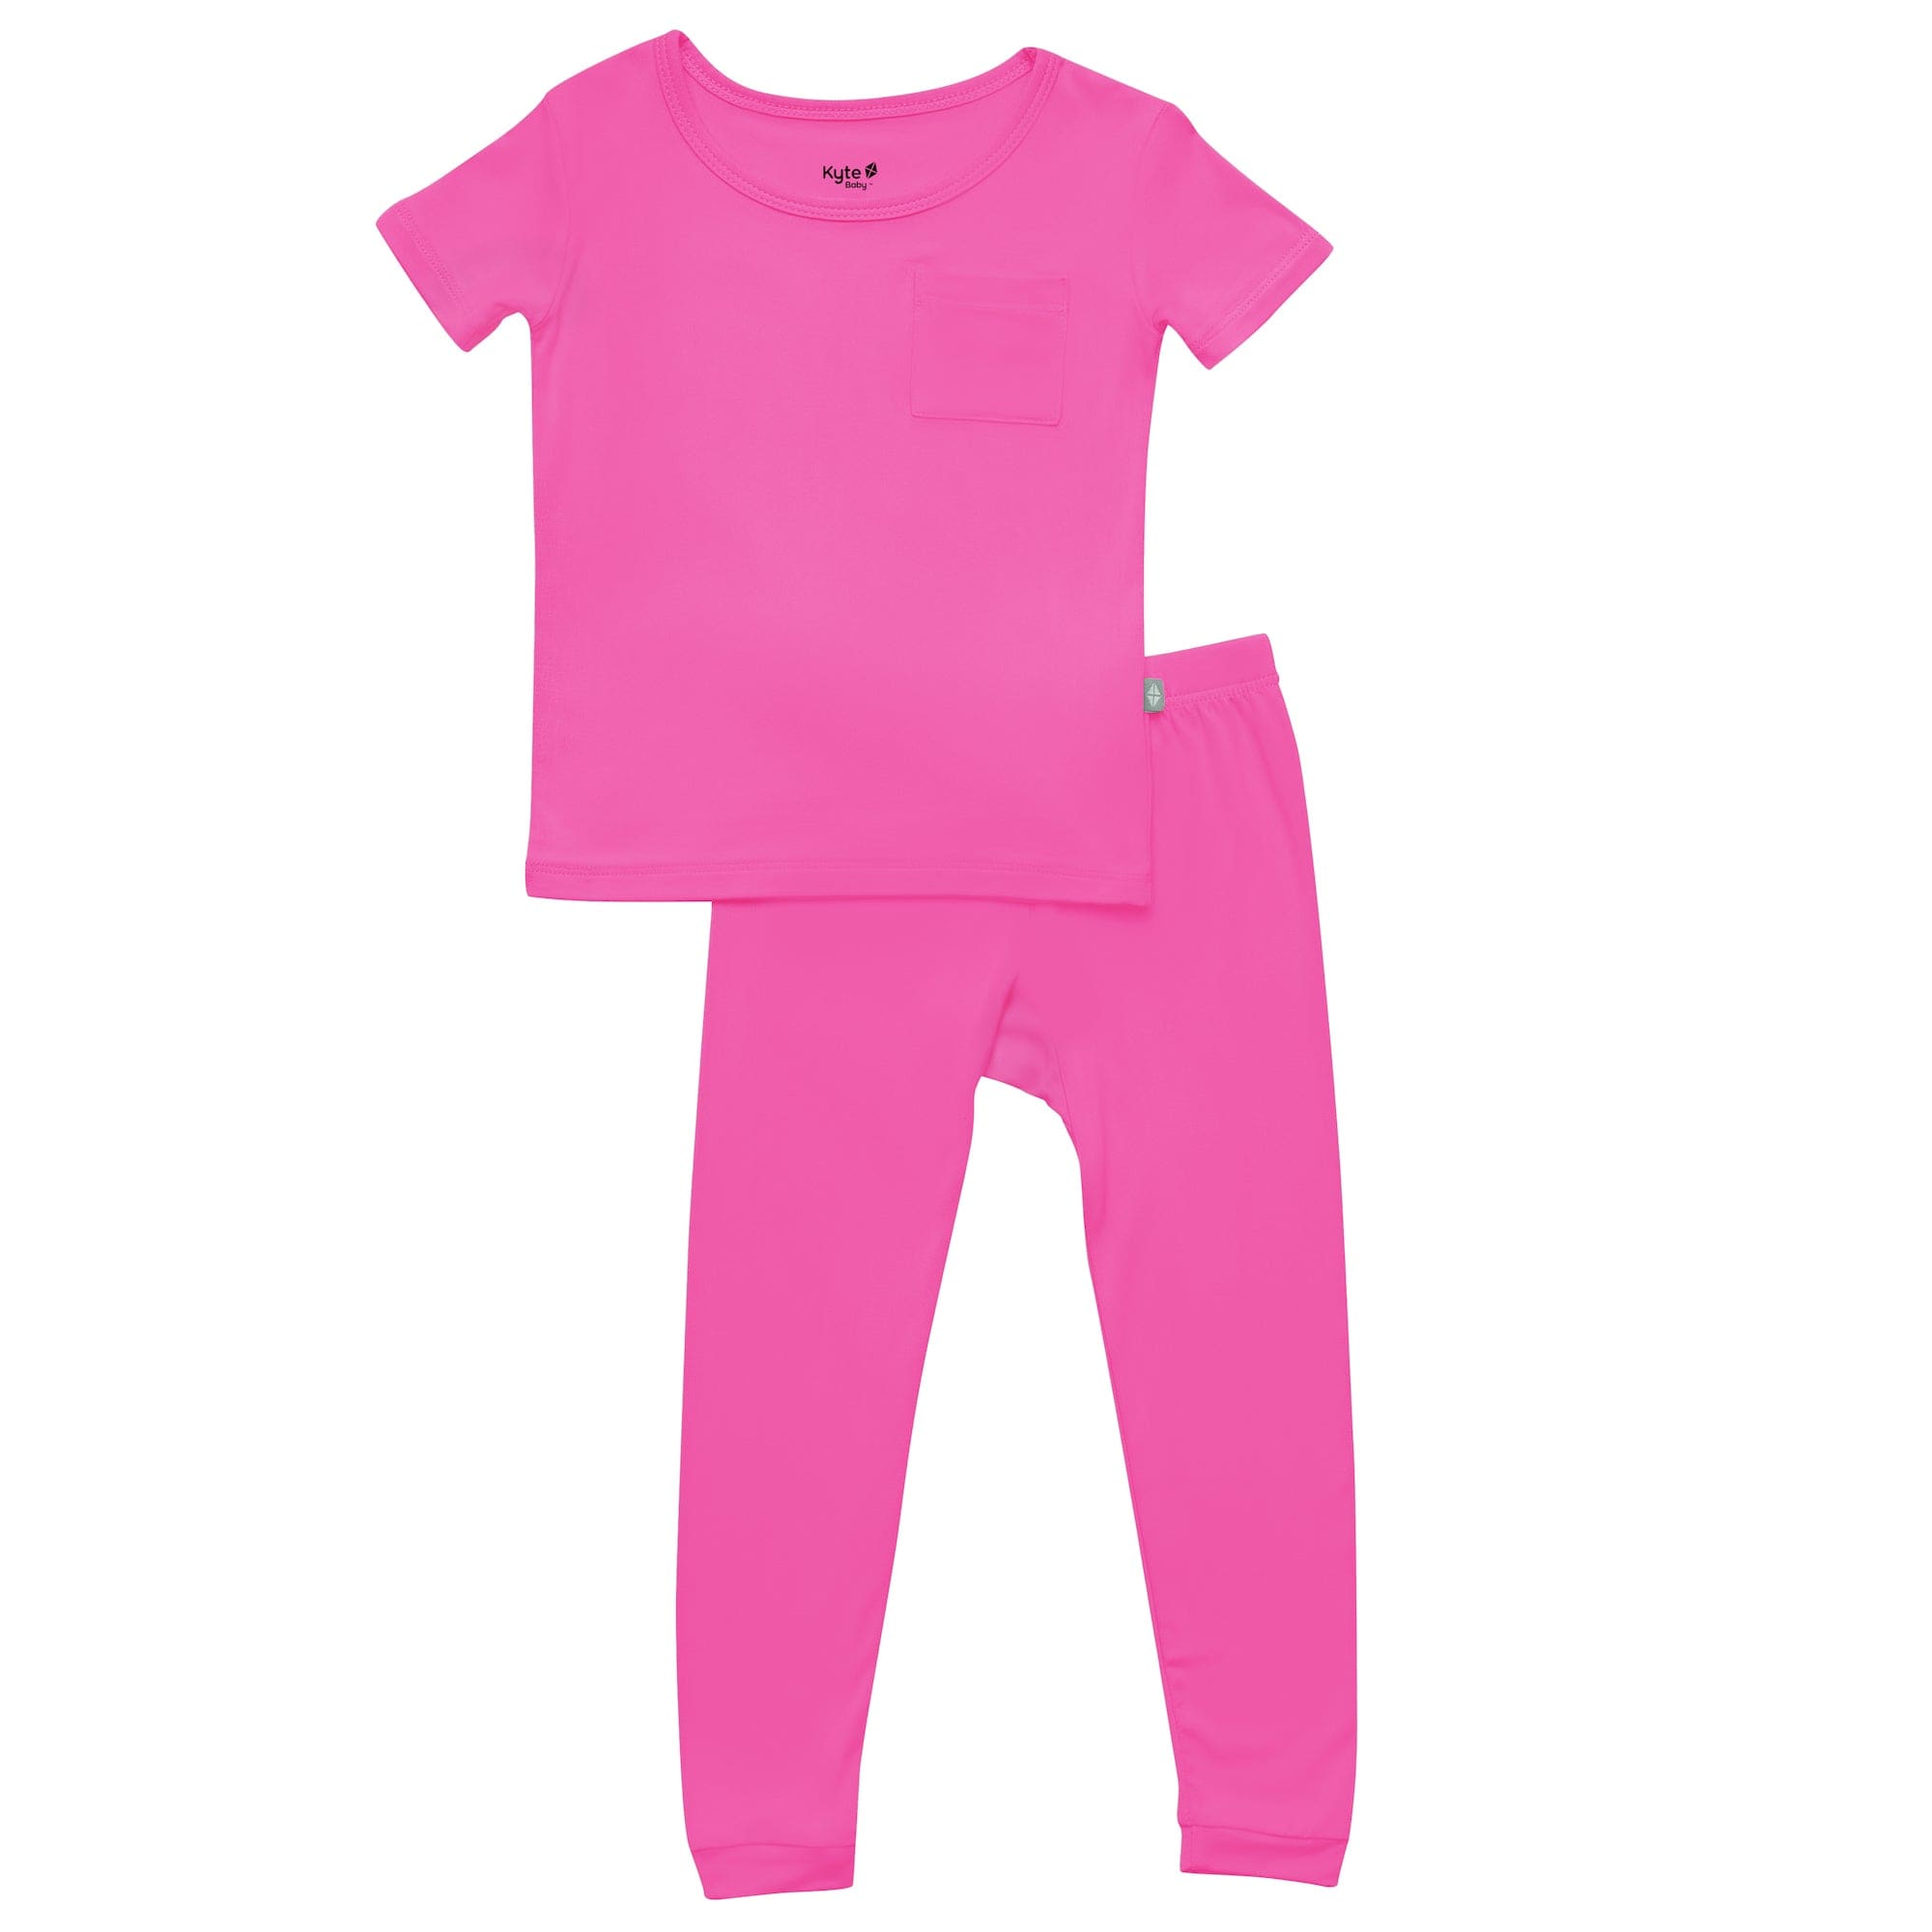 Short Sleeve with Pants Pajamas in Raspberry